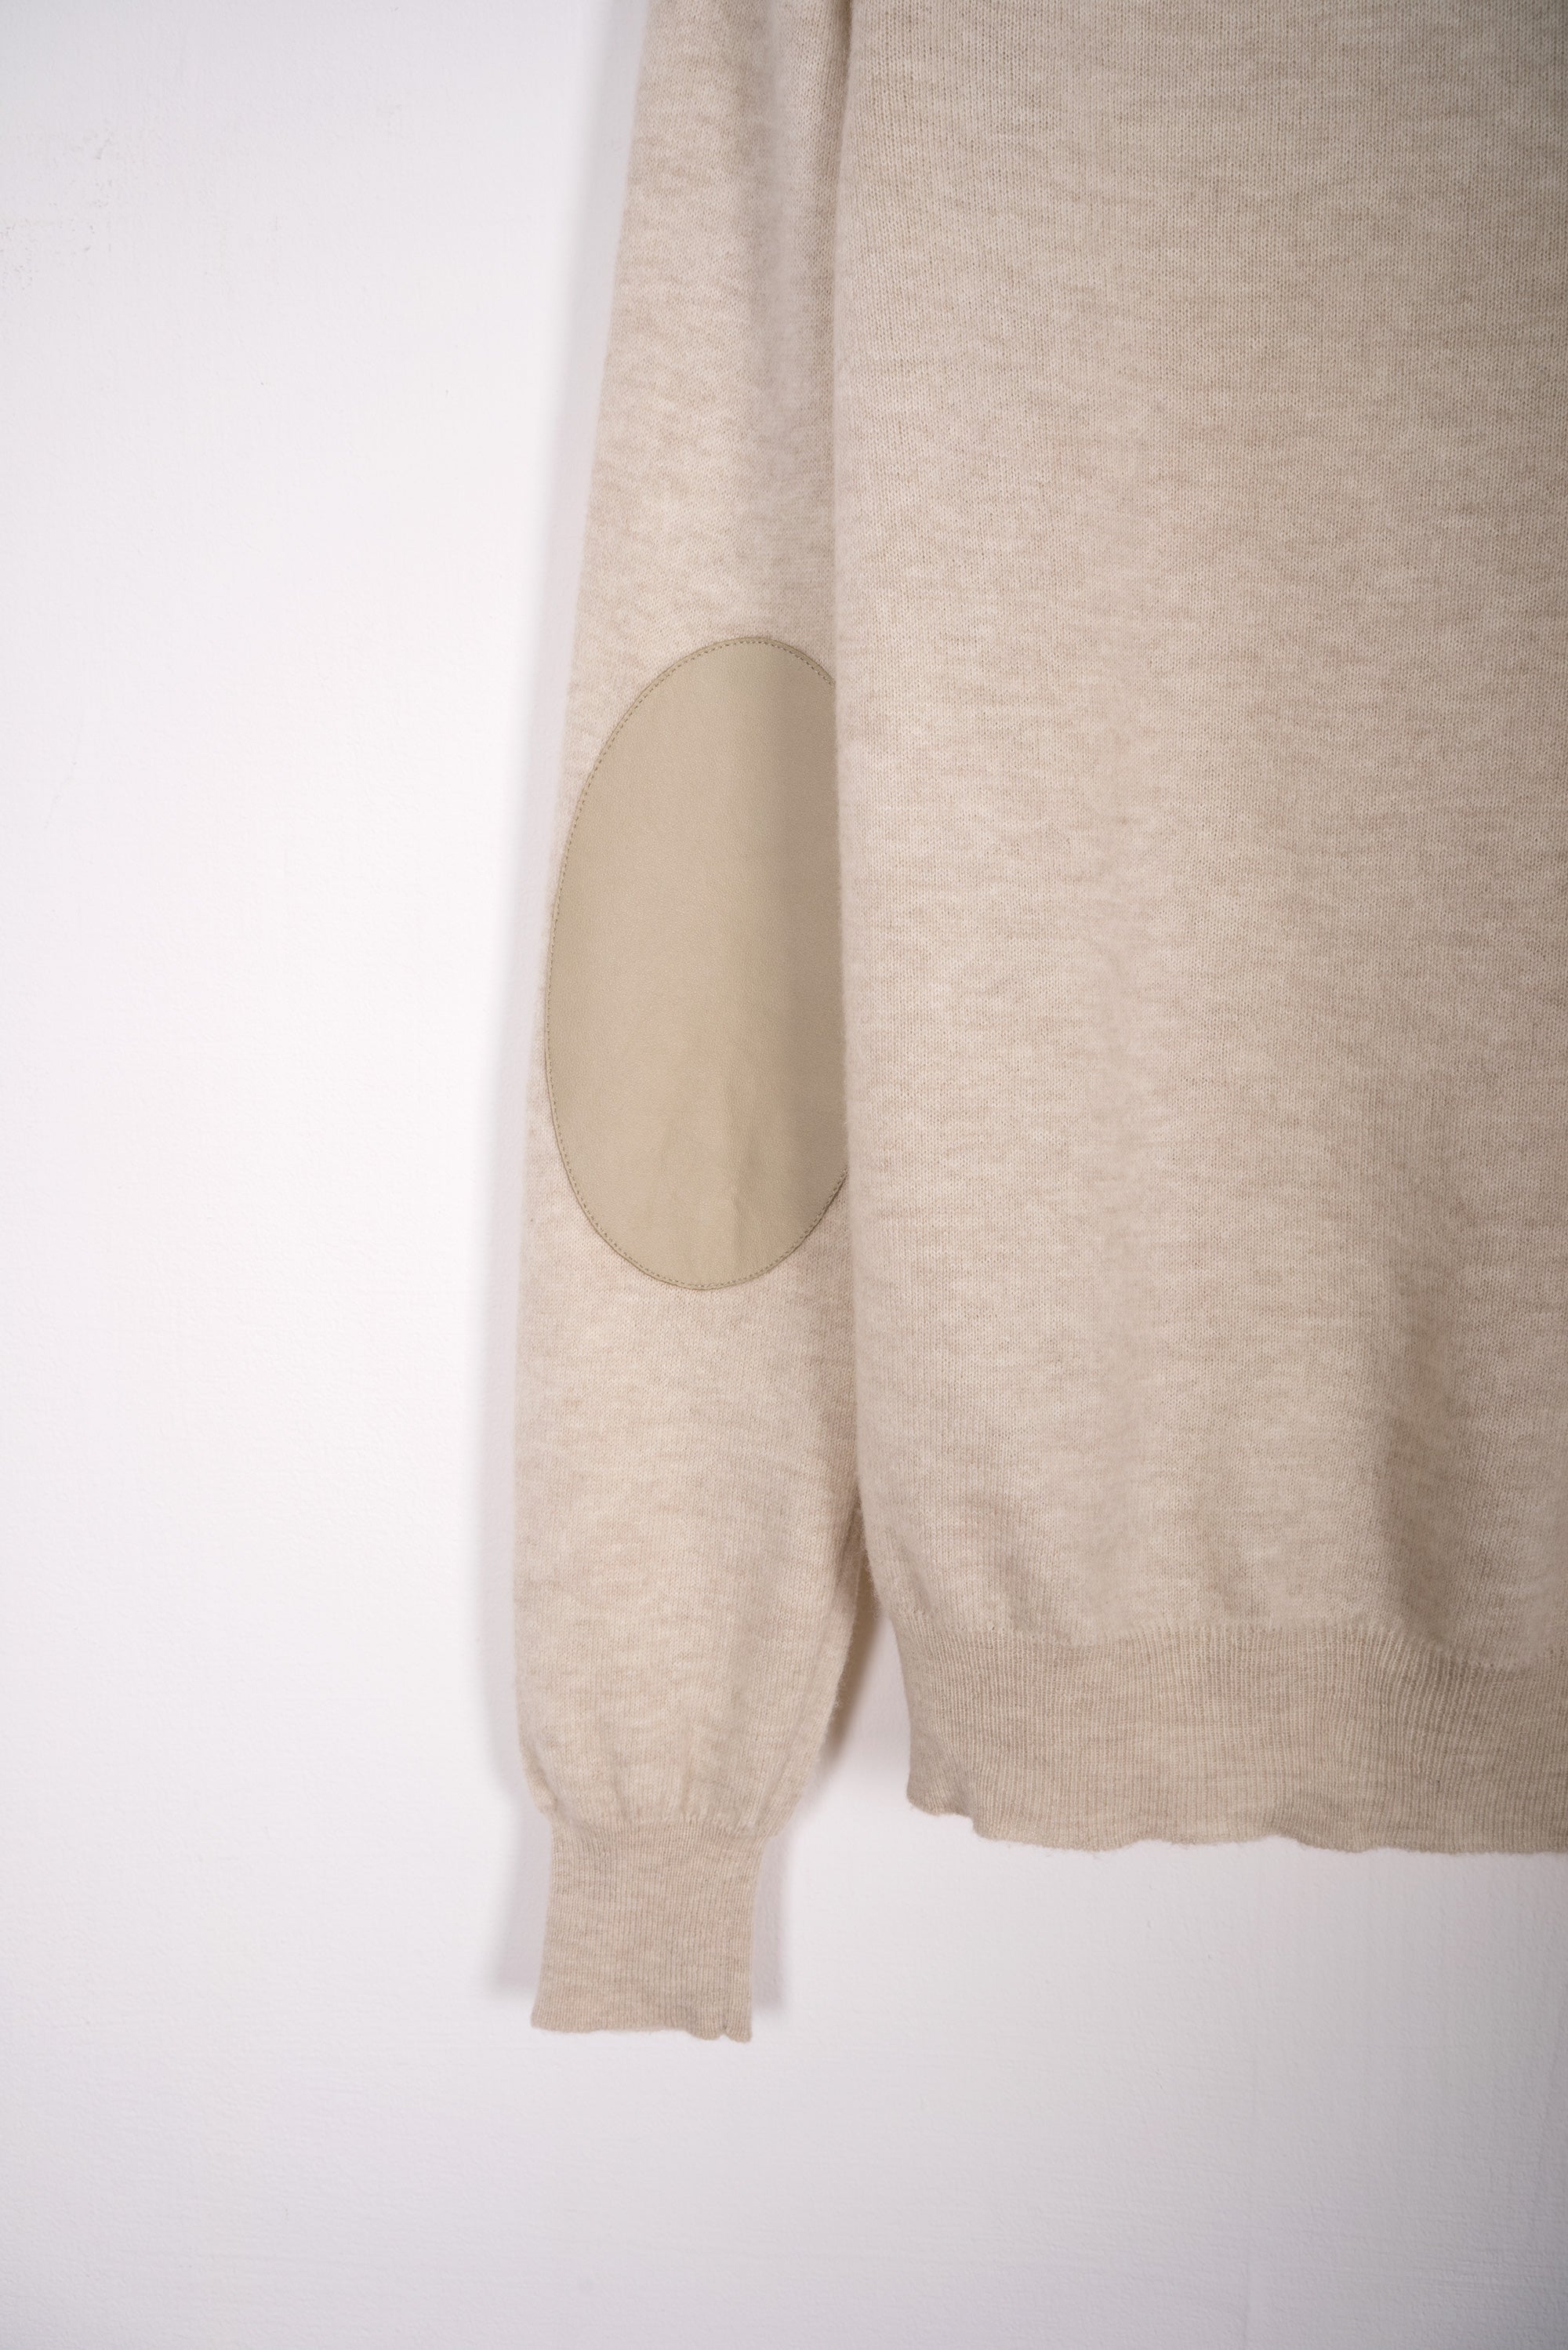 2008 A/W WOOL CREWNECK WITH LEATHER ELBOW PATCHES